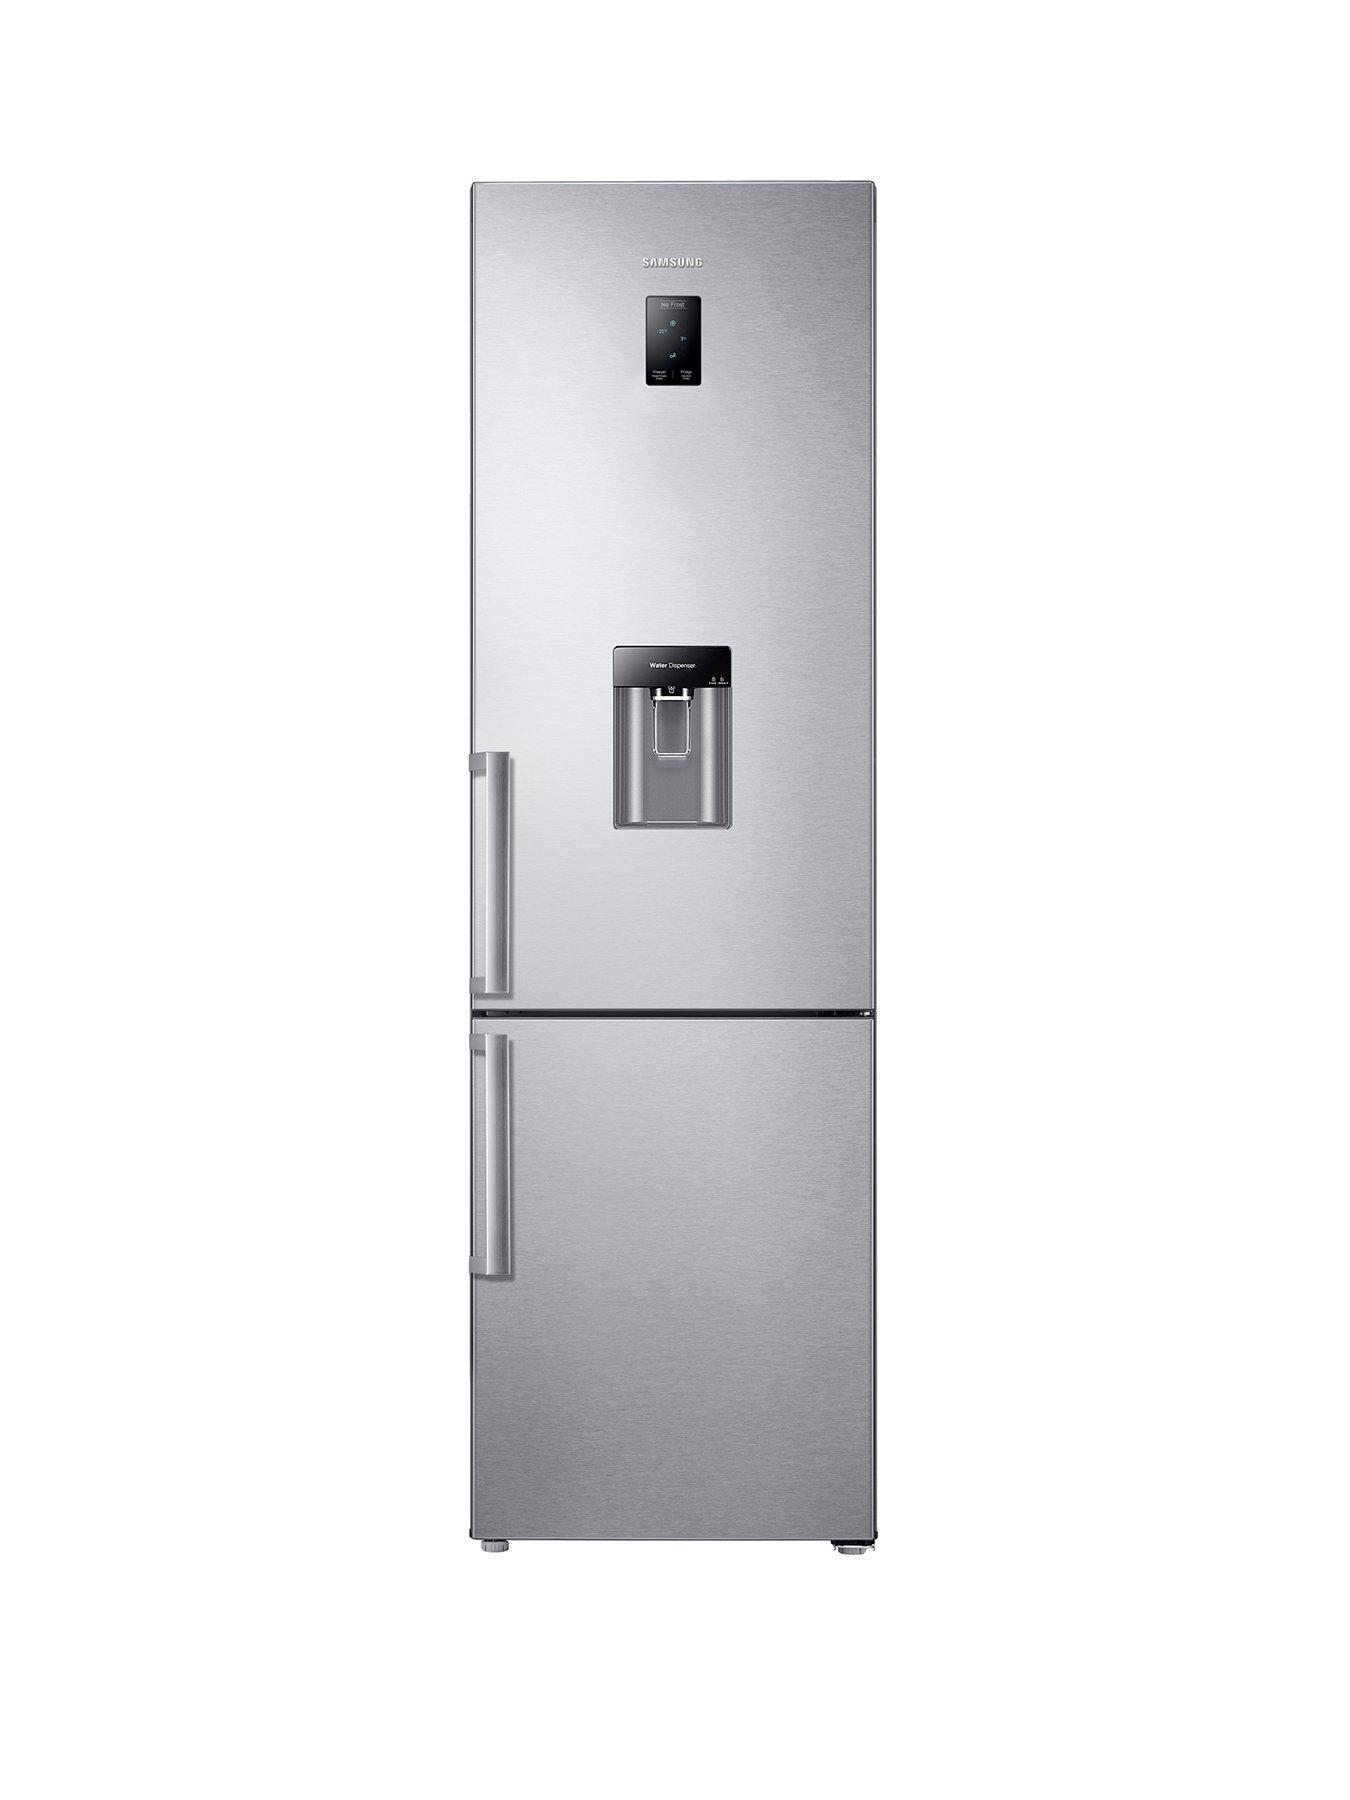 Samsung Rb37J5920Sl/Eu 60Cm Wide Frost-Free Fridge Freezer With All-Around Cooling System And 5 Year Samsung Parts And Labour Warranty – Silver